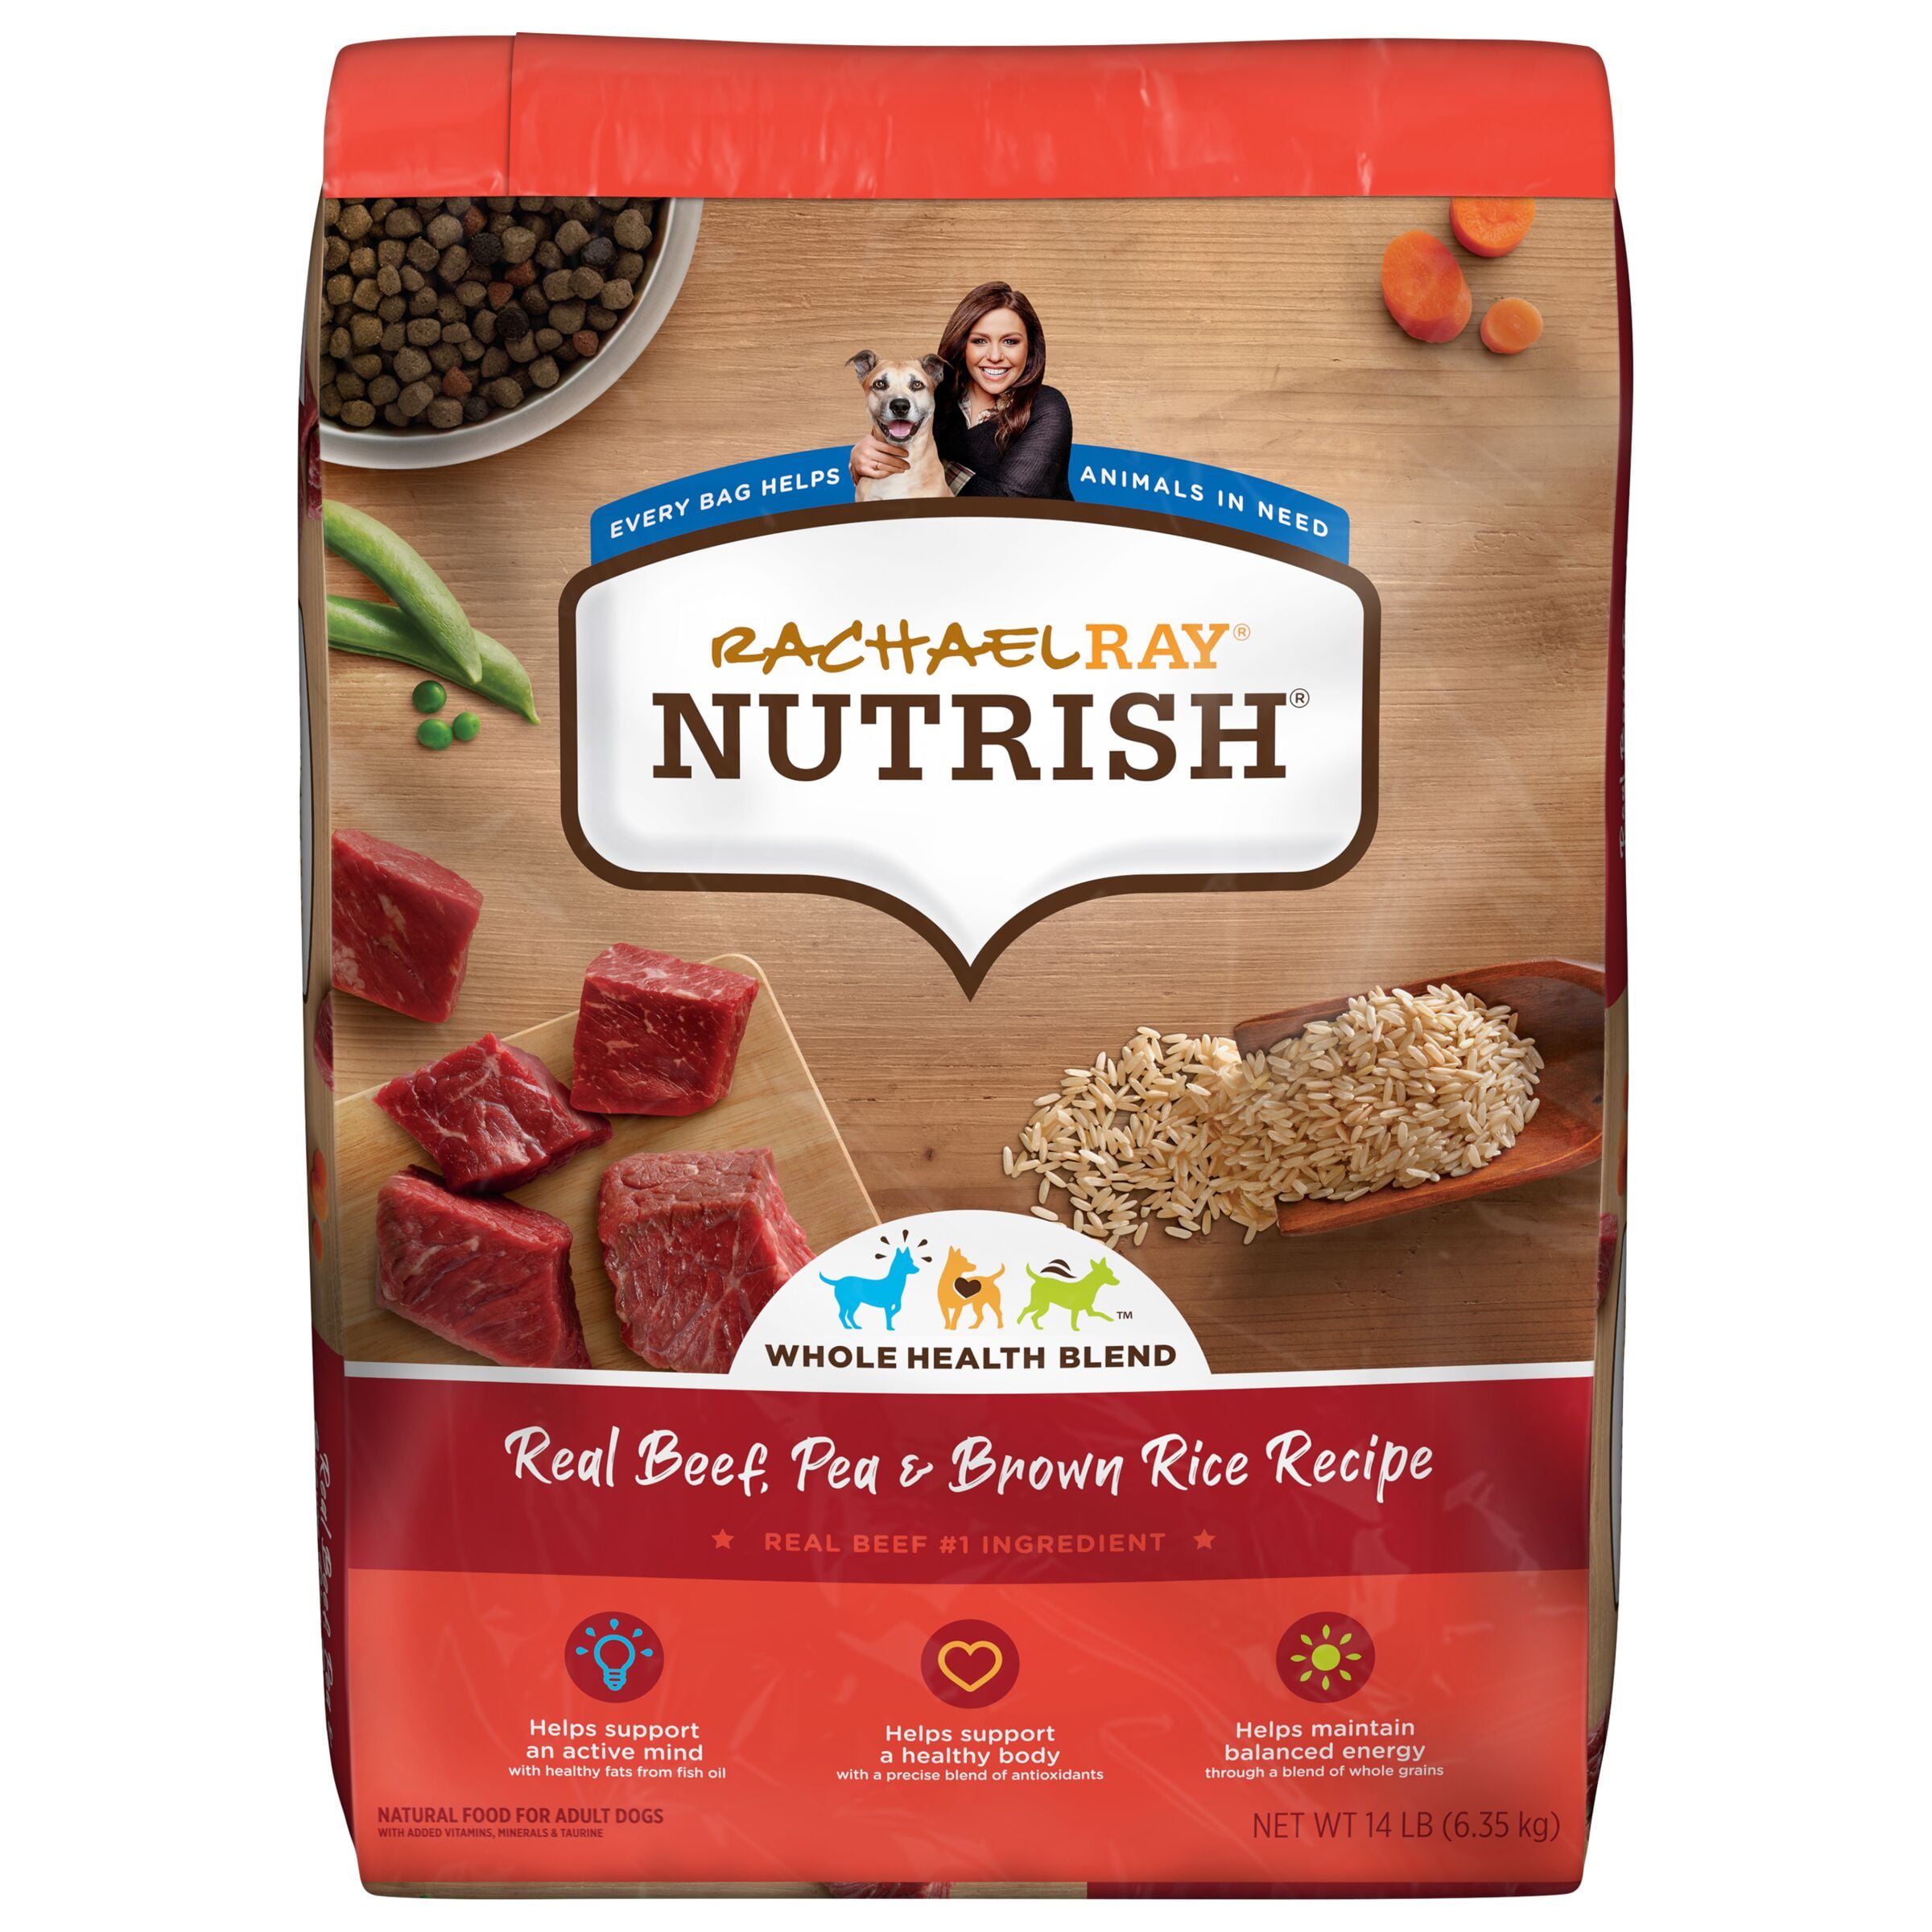 Rachael Ray Nutrish Real Beef, Pea & Brown Rice Recipe Dry Dog Food, 14 lb. Bag (Packaging May Vary)